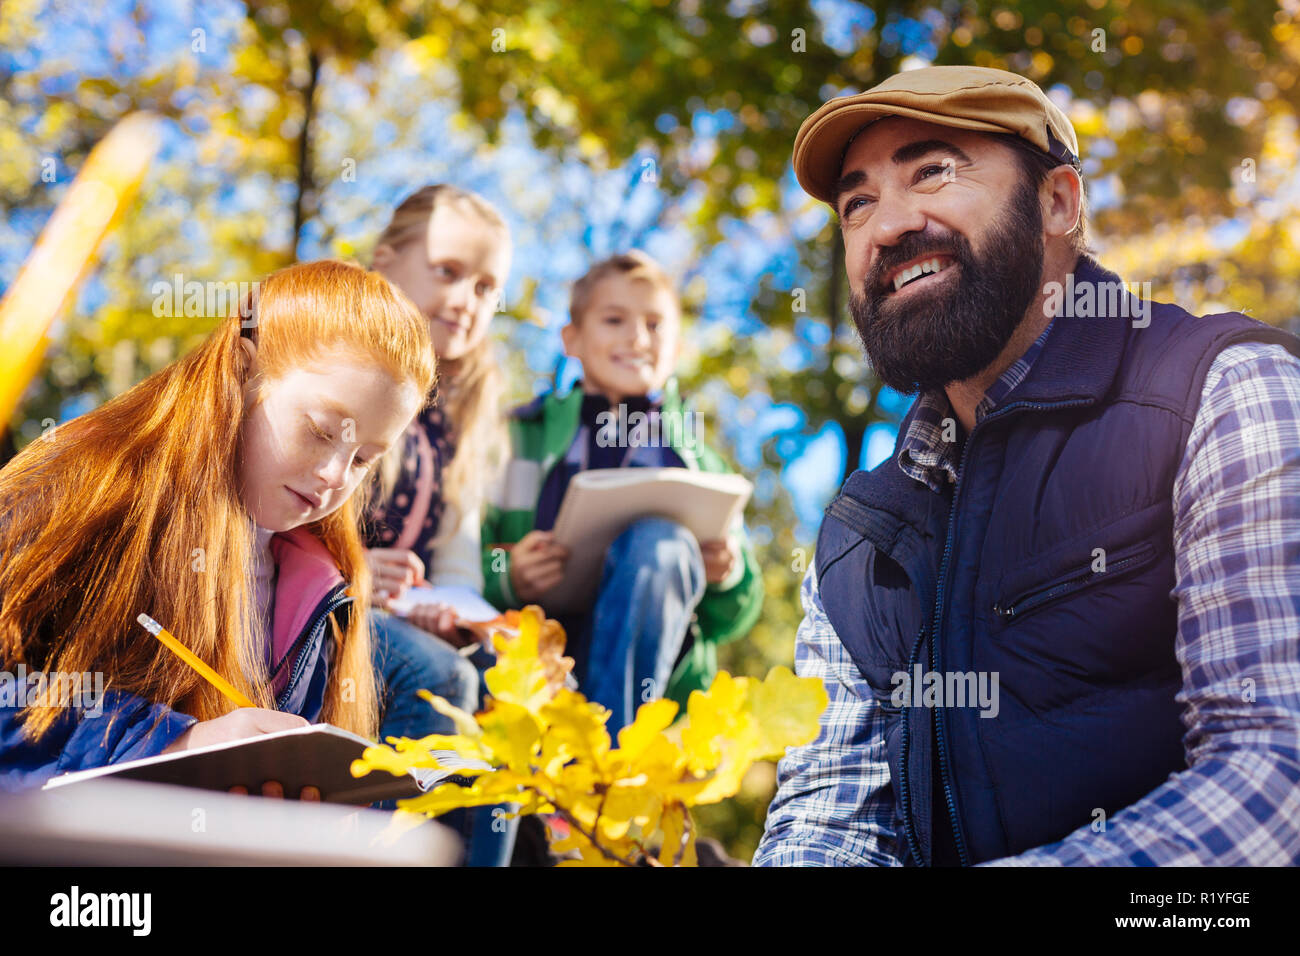 Pleasant bearded man showing his positive mood Stock Photo